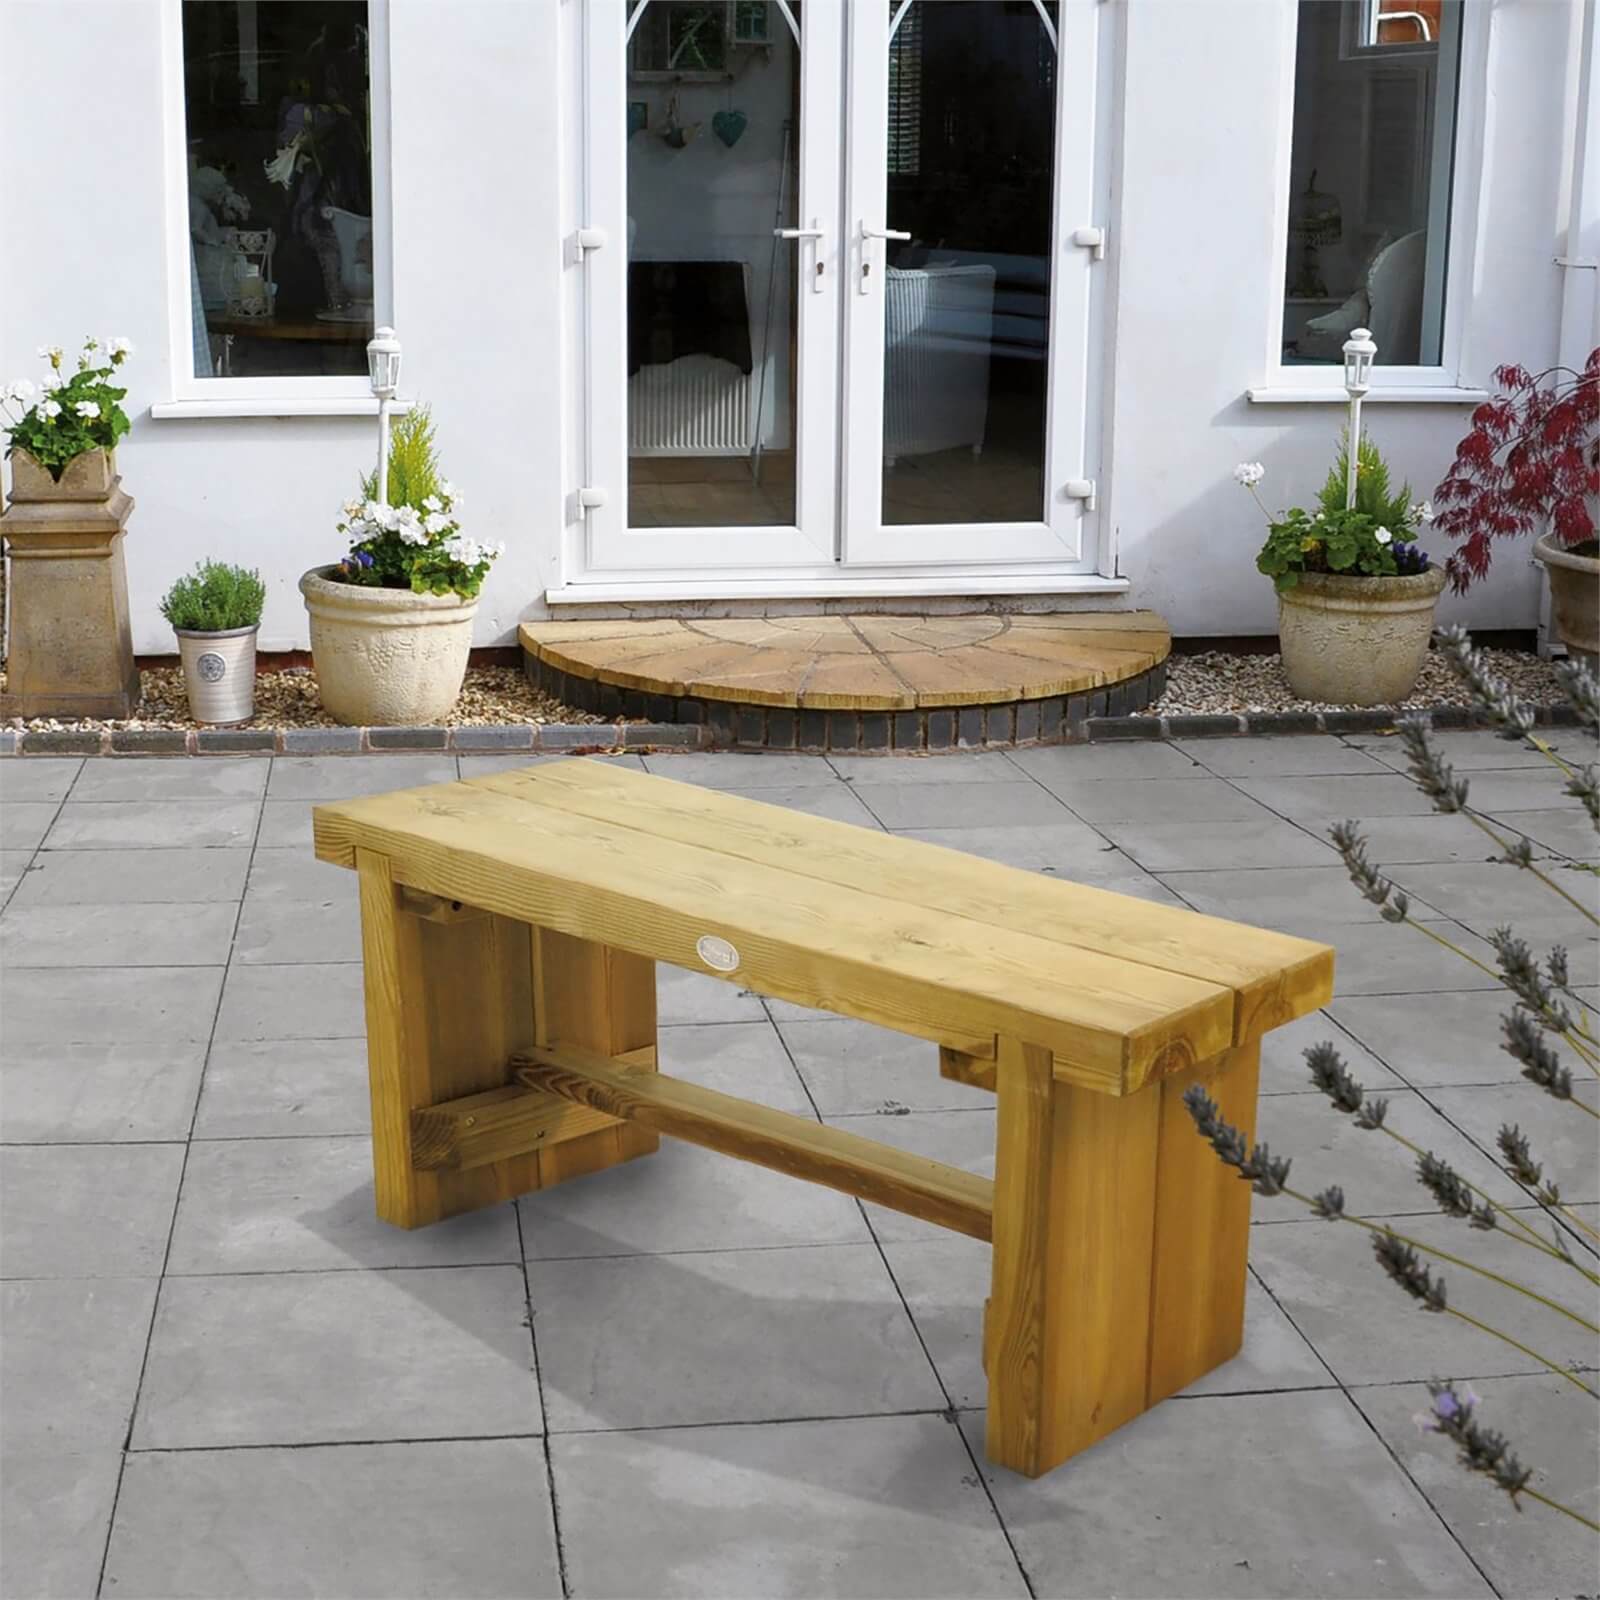 Forest Double Wooden Sleeper Bench - 1.2m